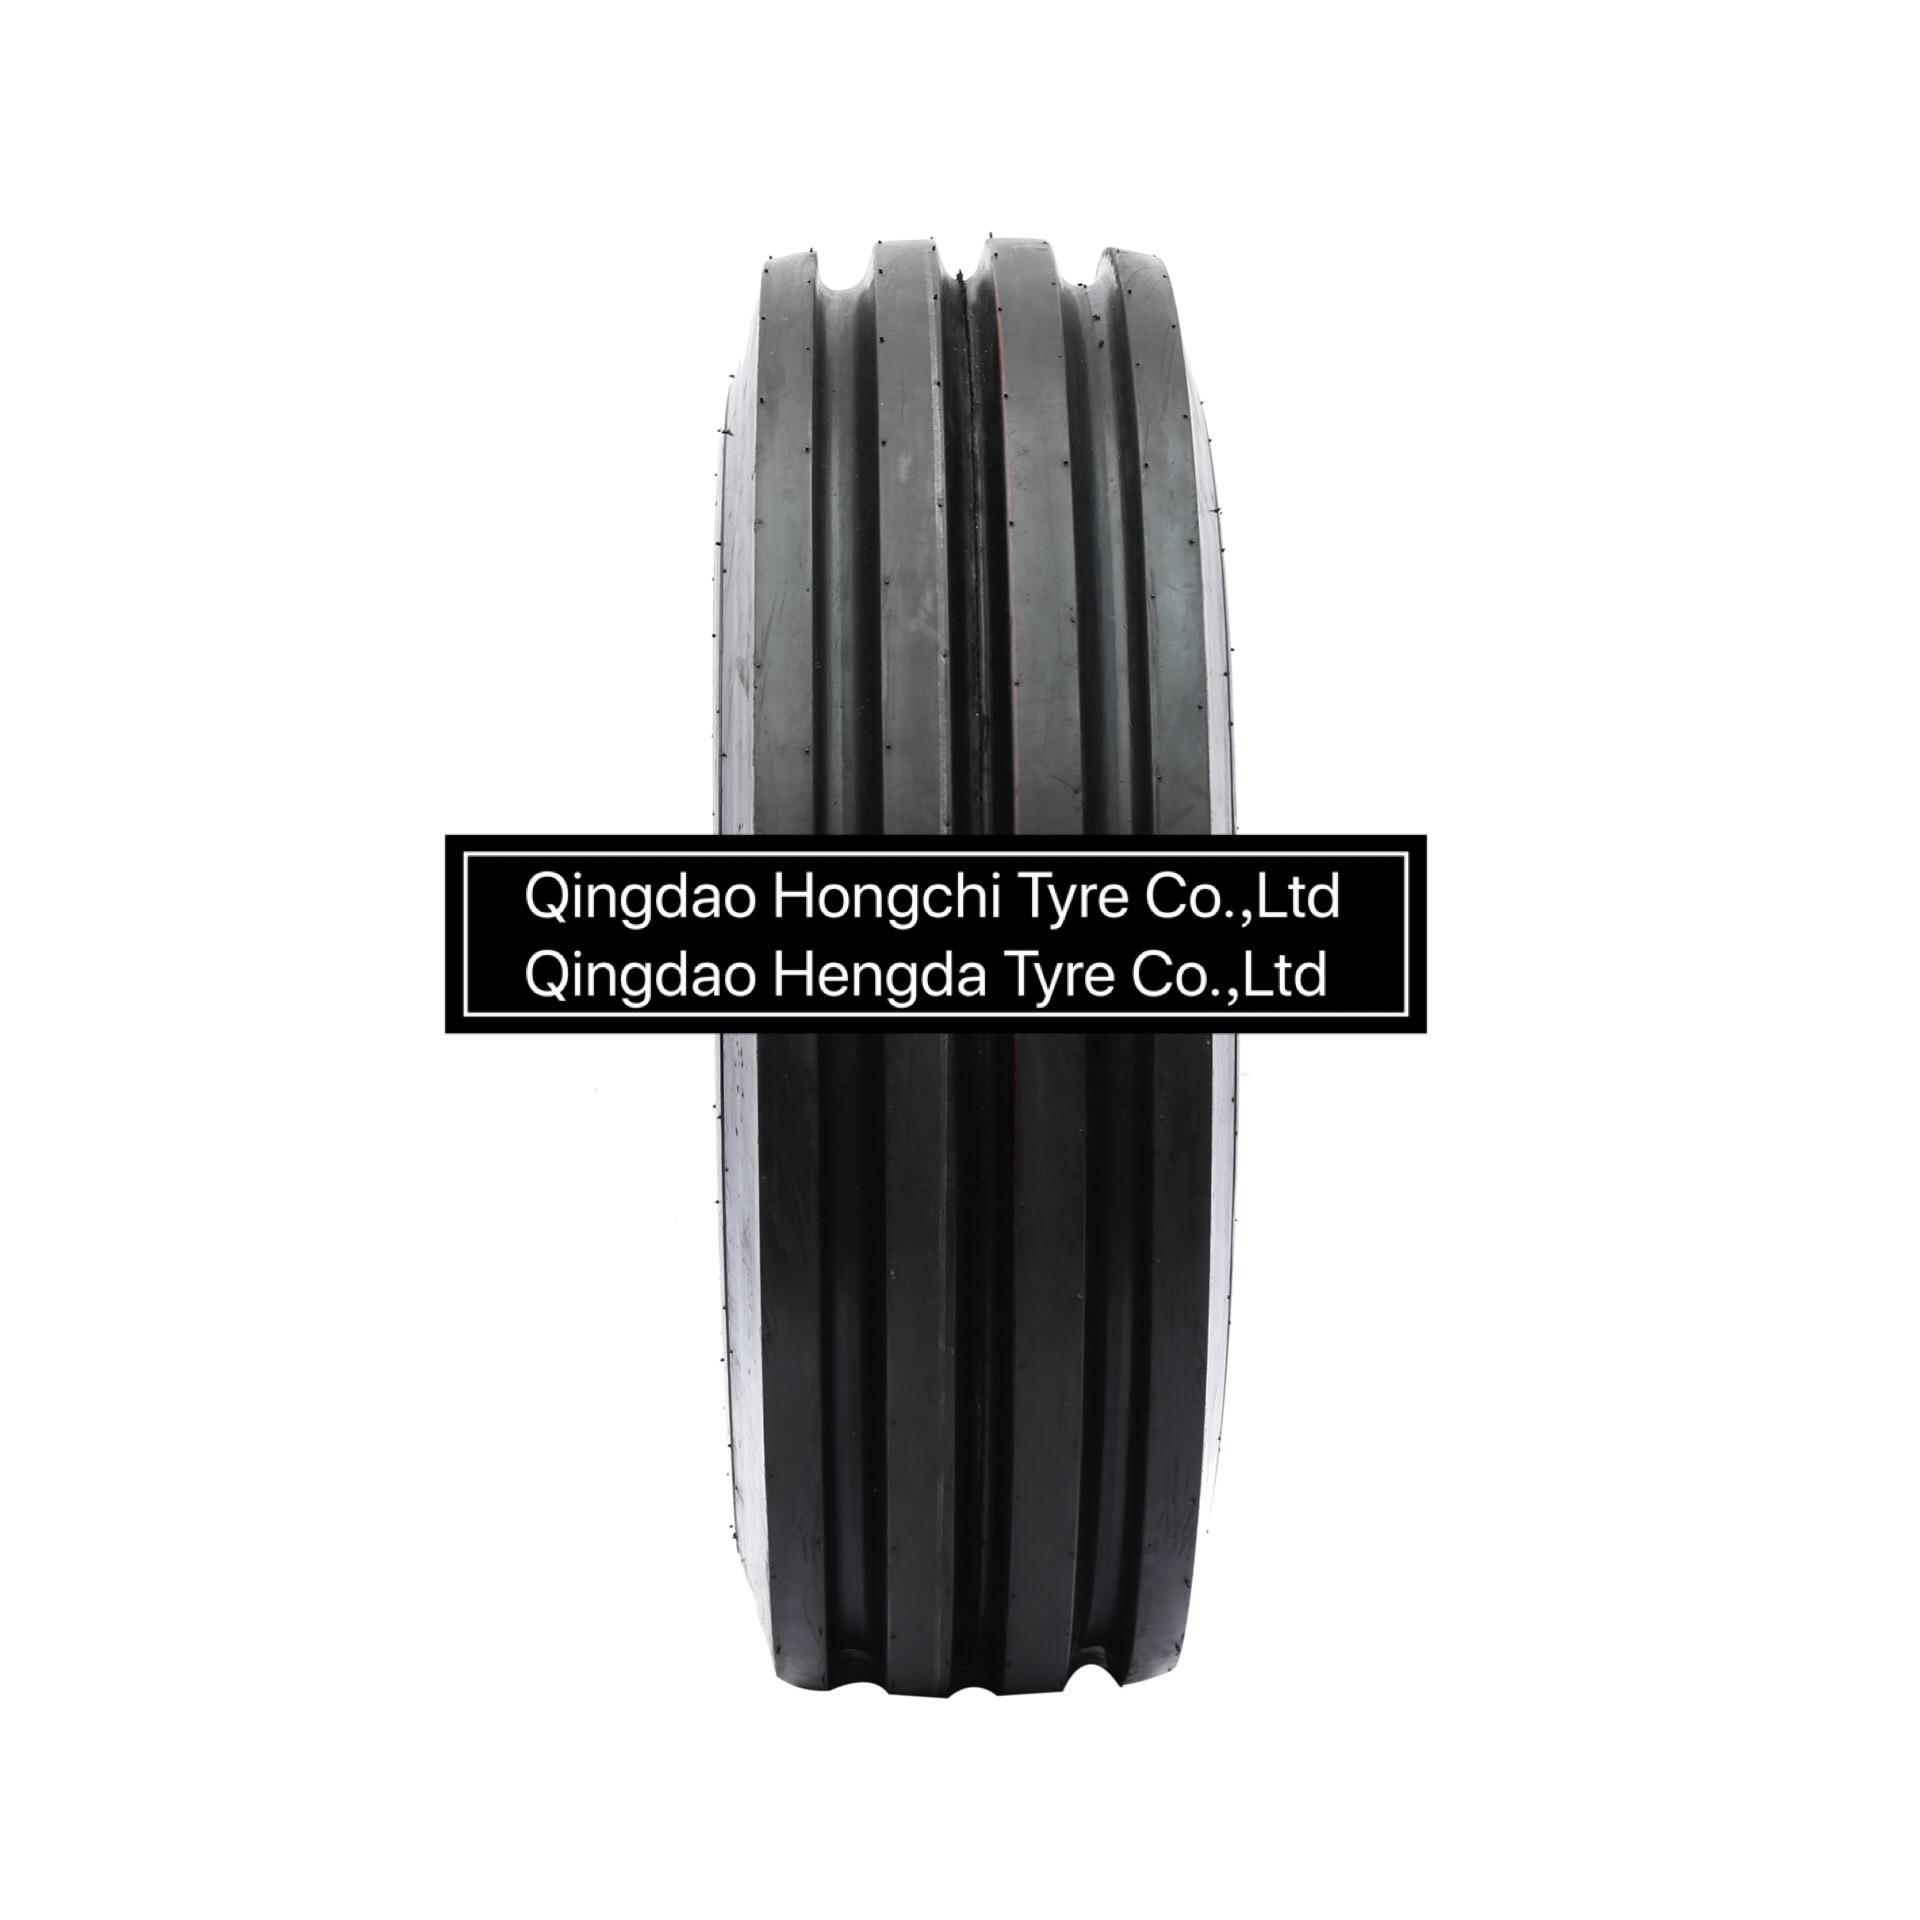 Agricultural Tyre 10.00-16 11.00-16 F2